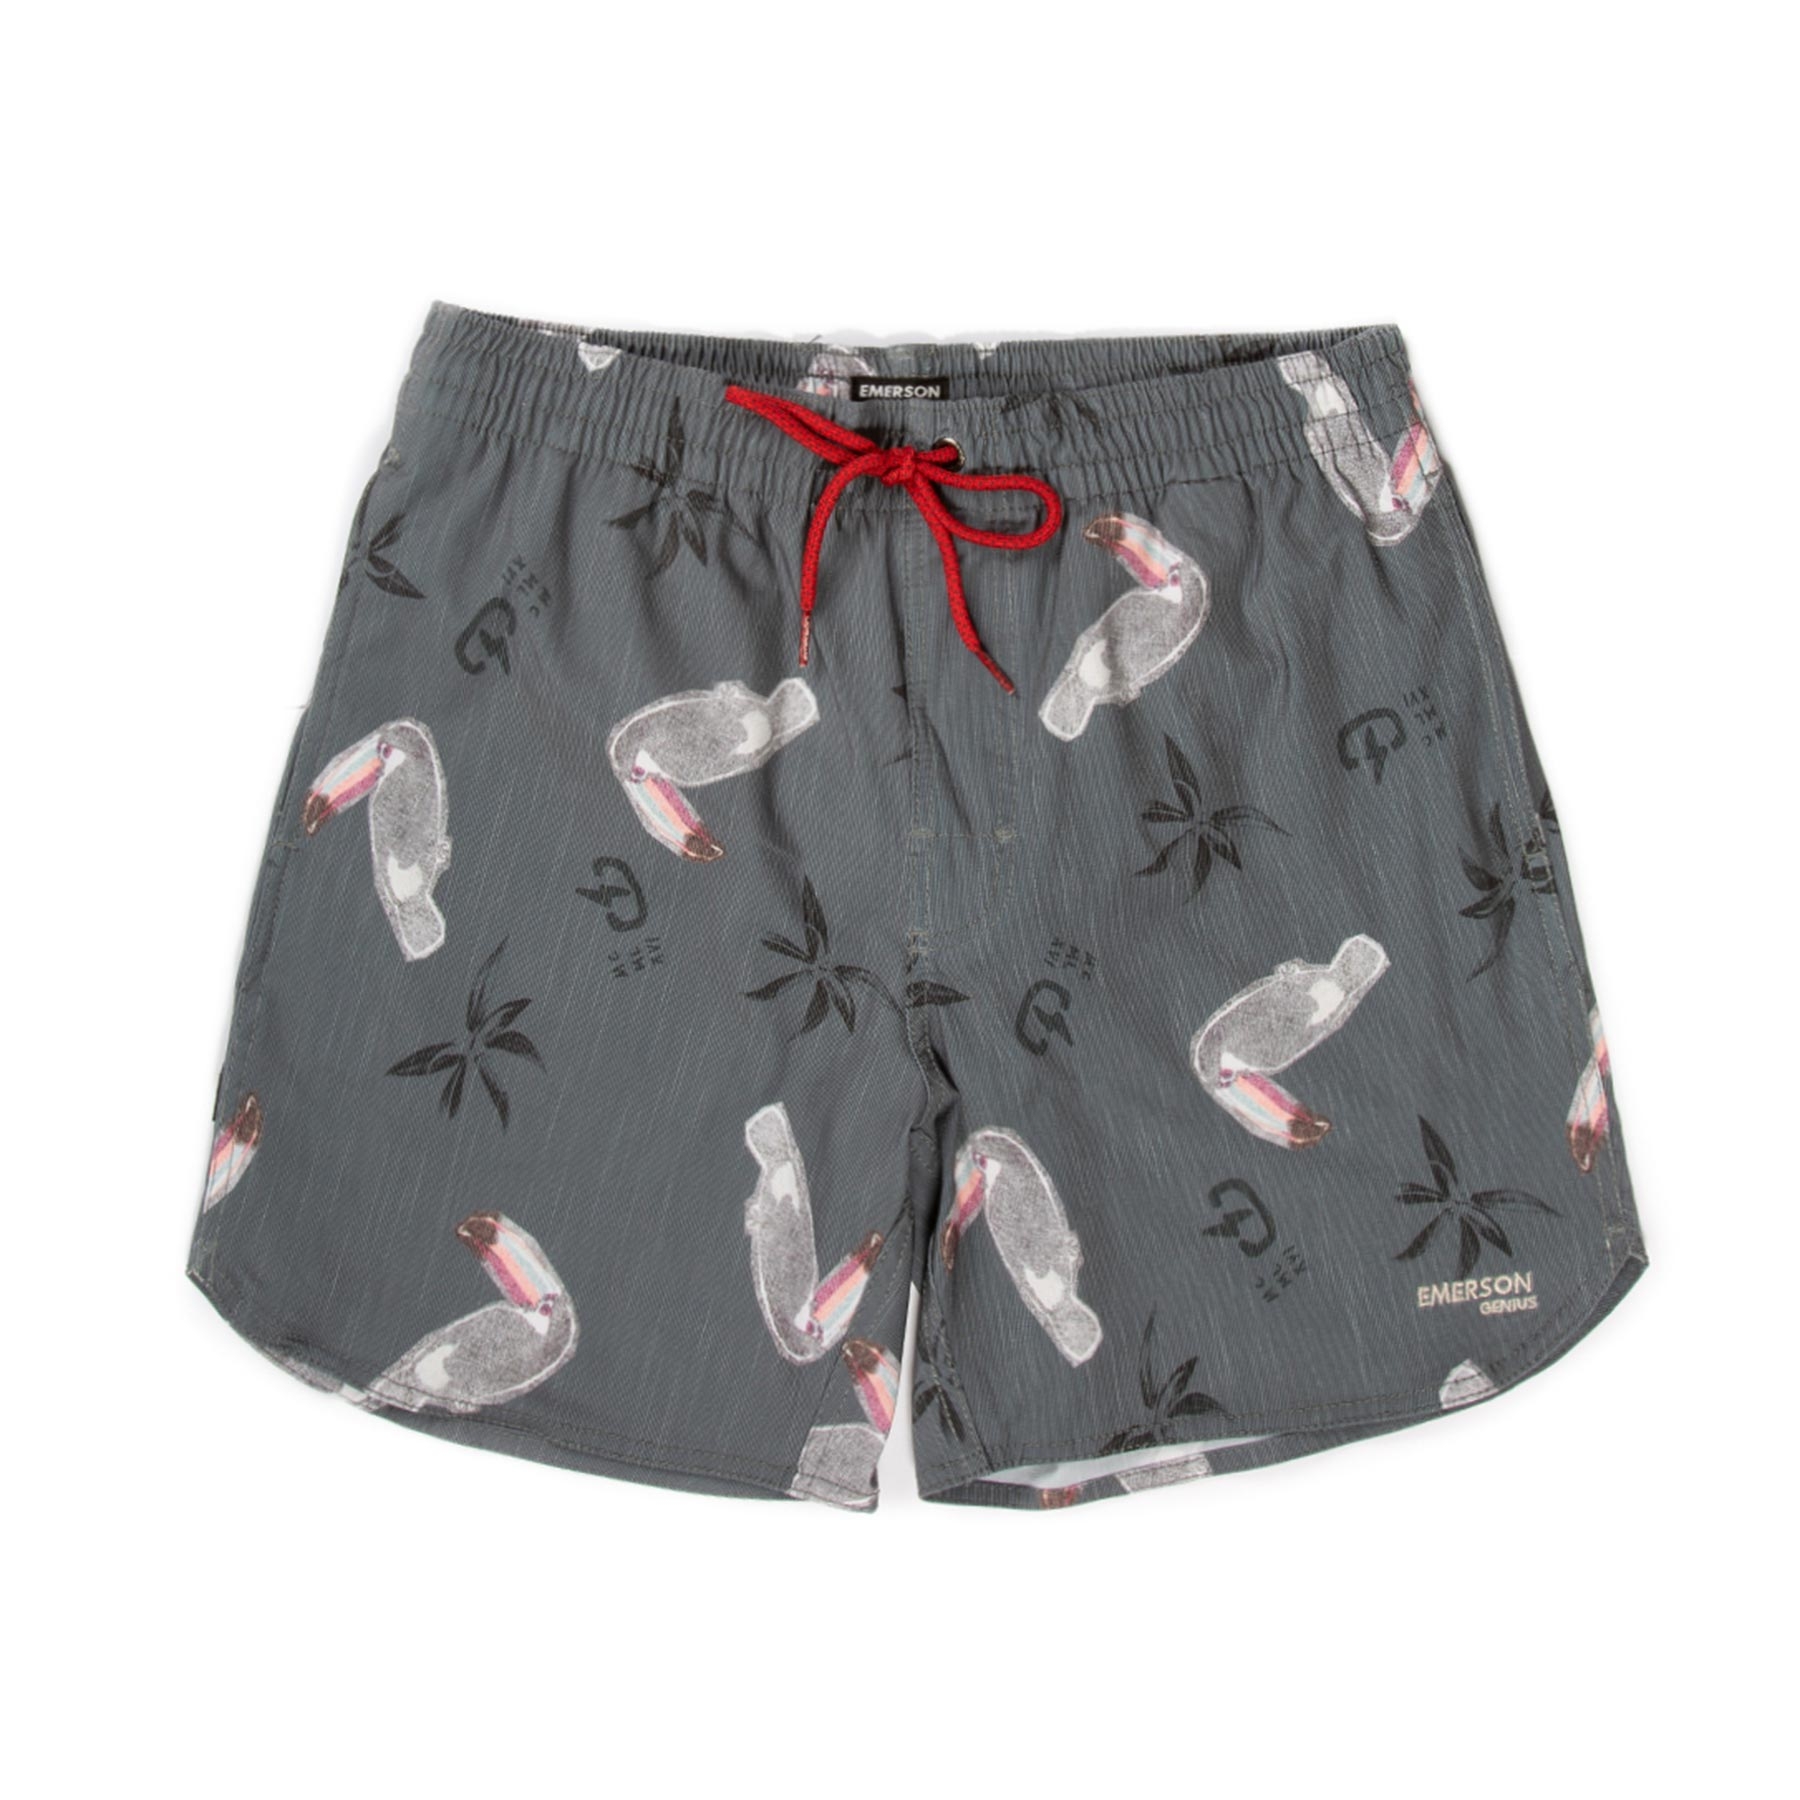 EMERSON PRINTED VOLLEY SHORTS